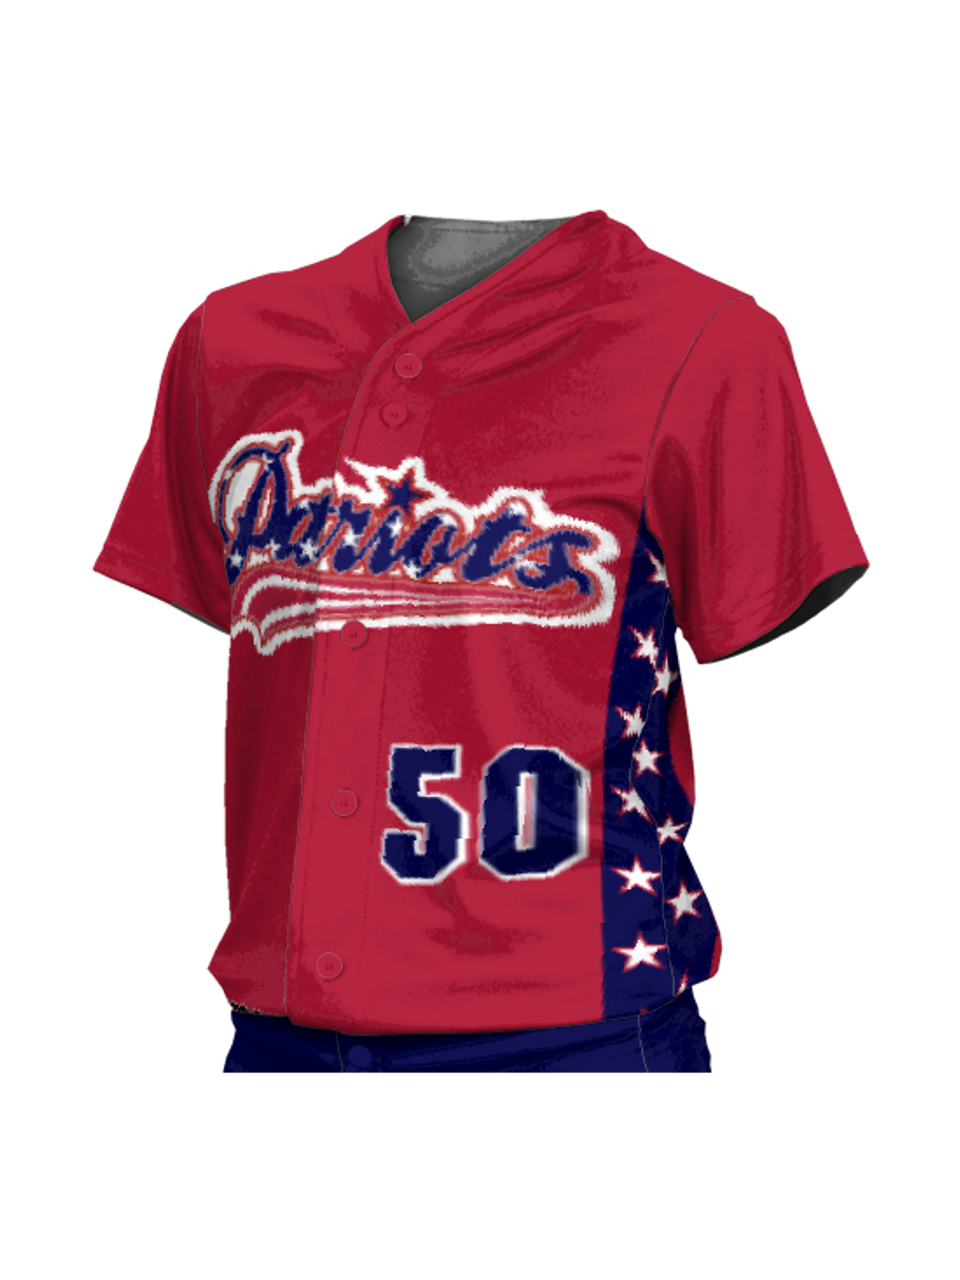 Control Series Premium - Womens/Girls Stars Custom Sublimated Button Front Softball Jersey